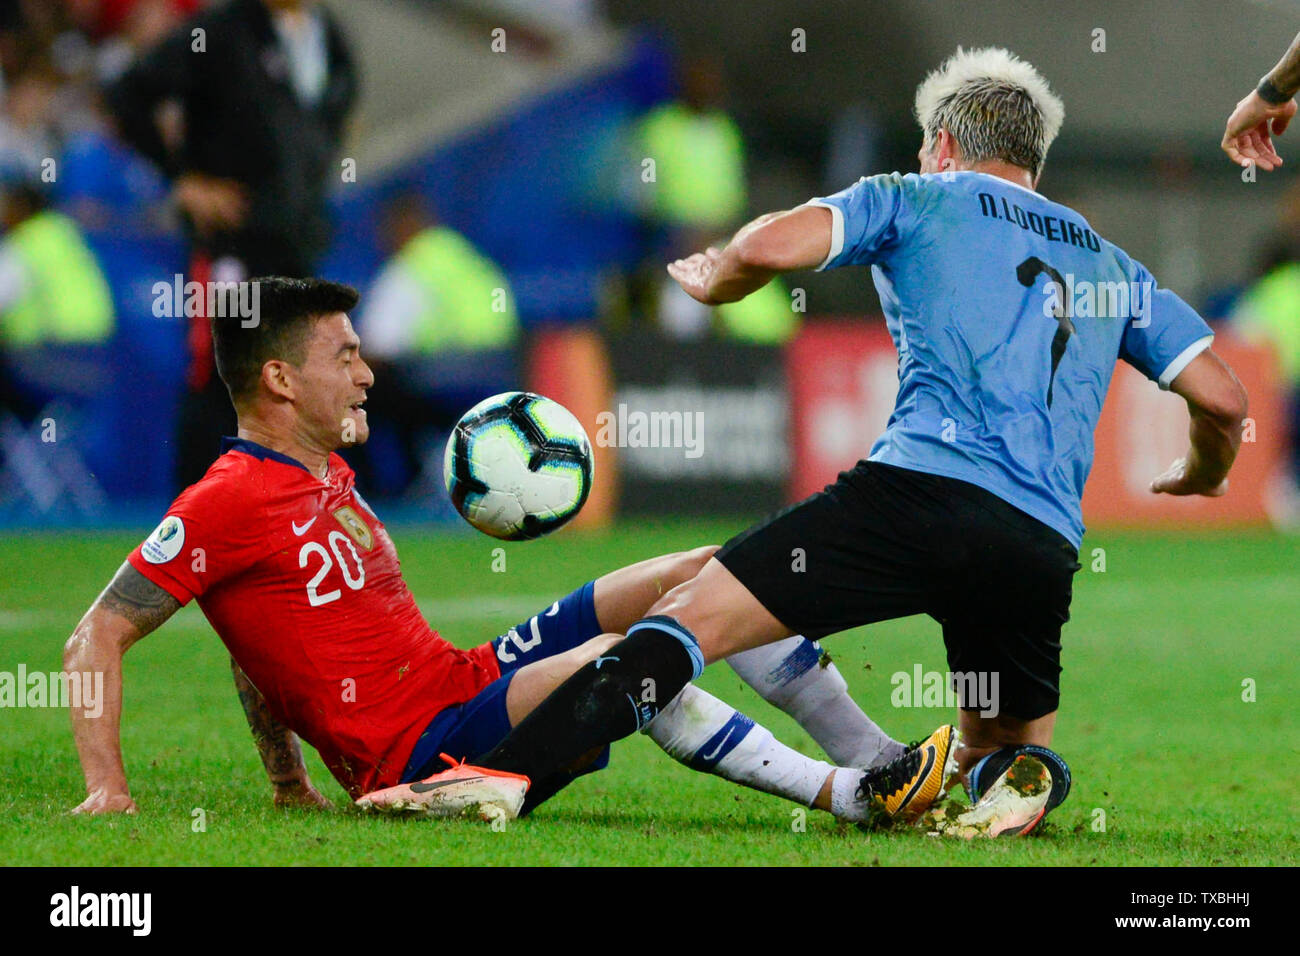 Rio De Janeiro, Brazil. 24th June, 2019. Aranguiz Sandoval and Nicolas Lodeiro during a match between Chile and Uruguay, valid for the group stage of the Copa America 2019, held this Monday (24) at the Maracanã Stadium in Rio de Janeiro, RJ. Credit: Celso Pupo/FotoArena/Alamy Live News Stock Photo